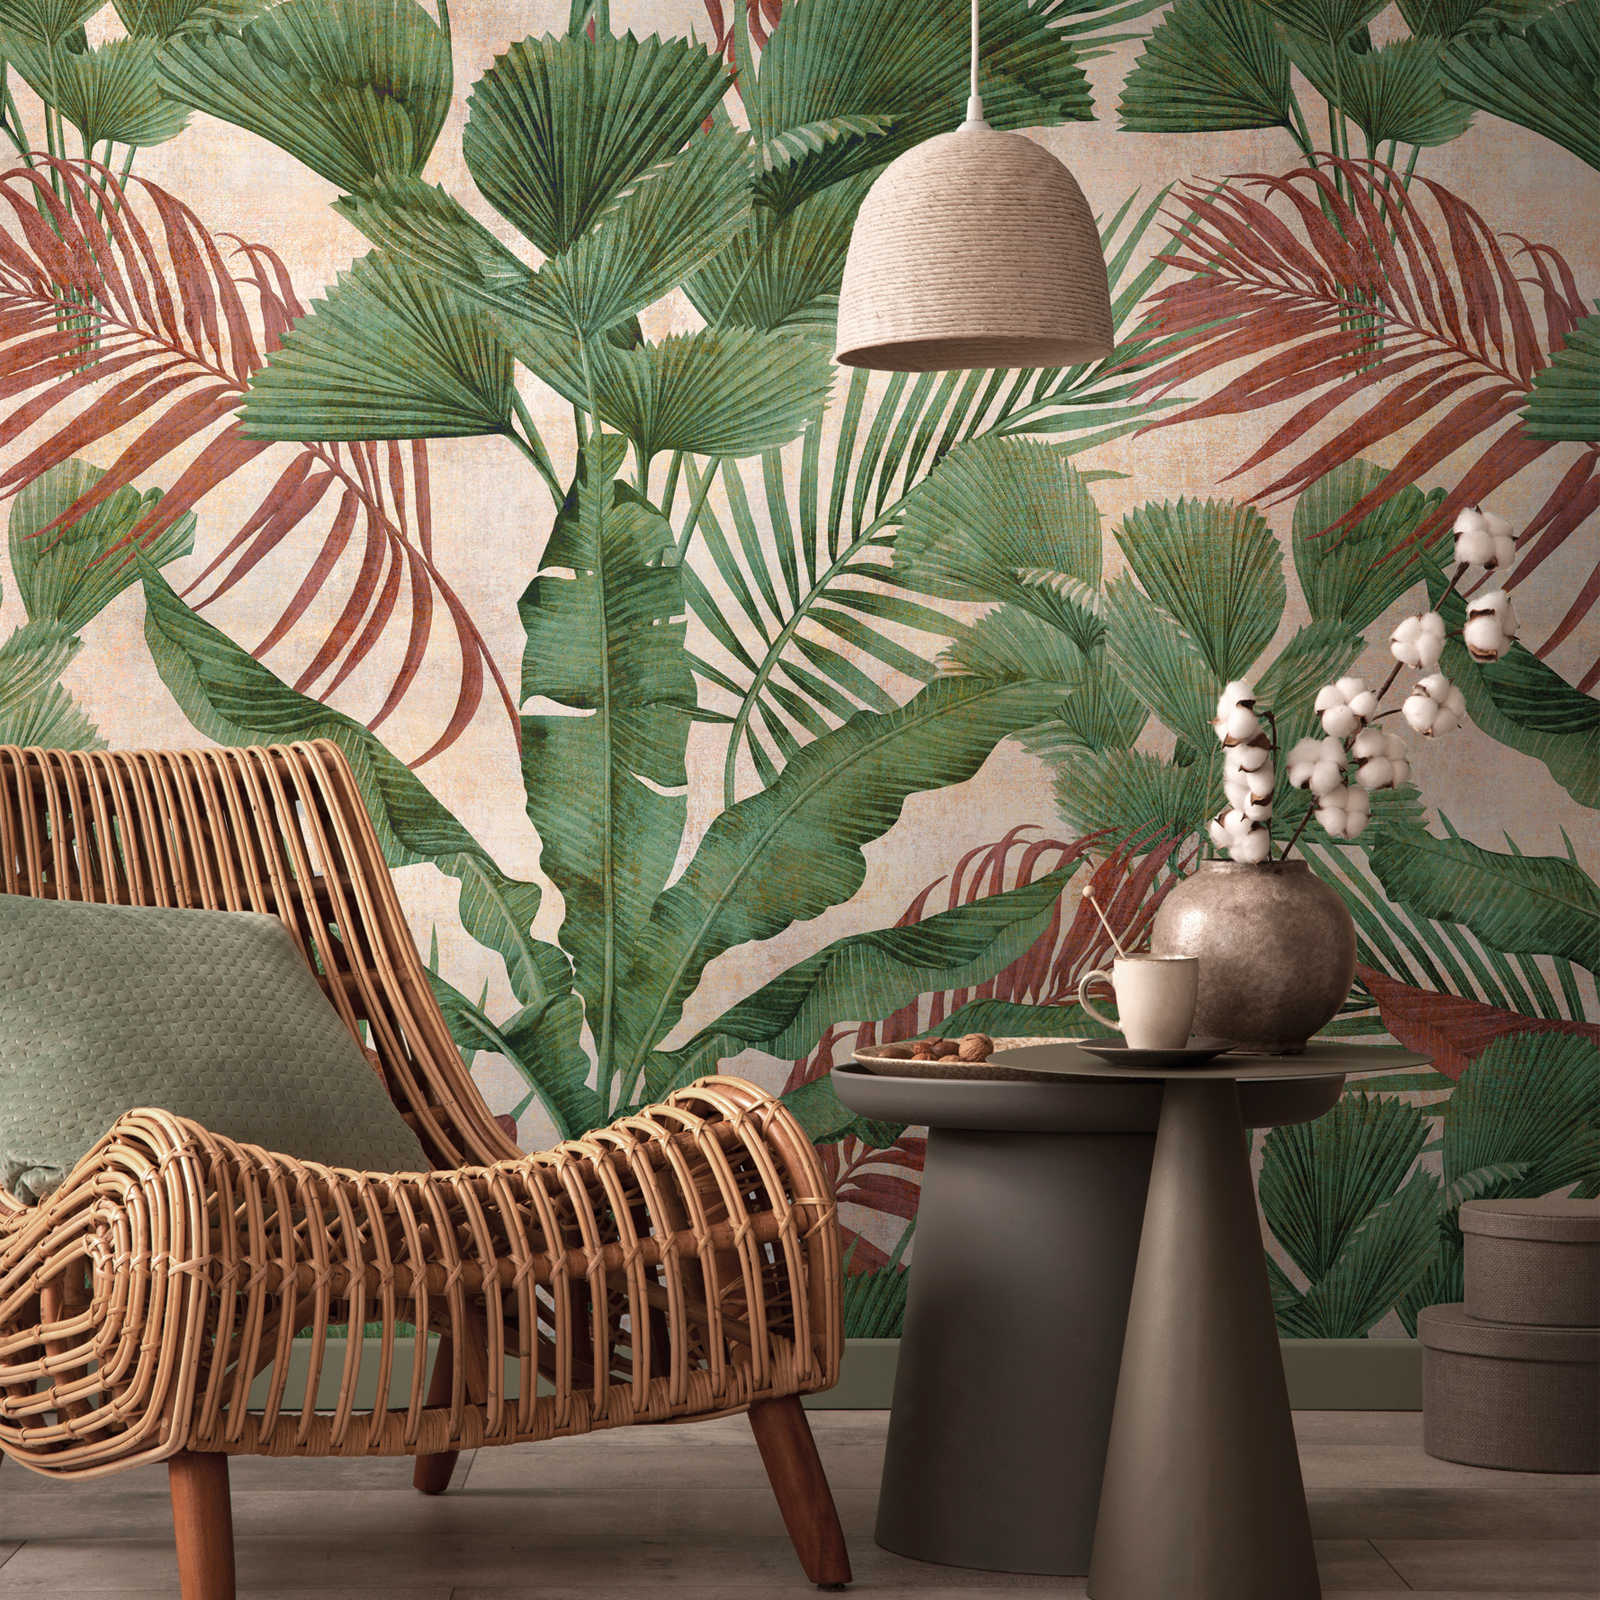 Jungle wallpaper with tropical plants - green, beige, red
